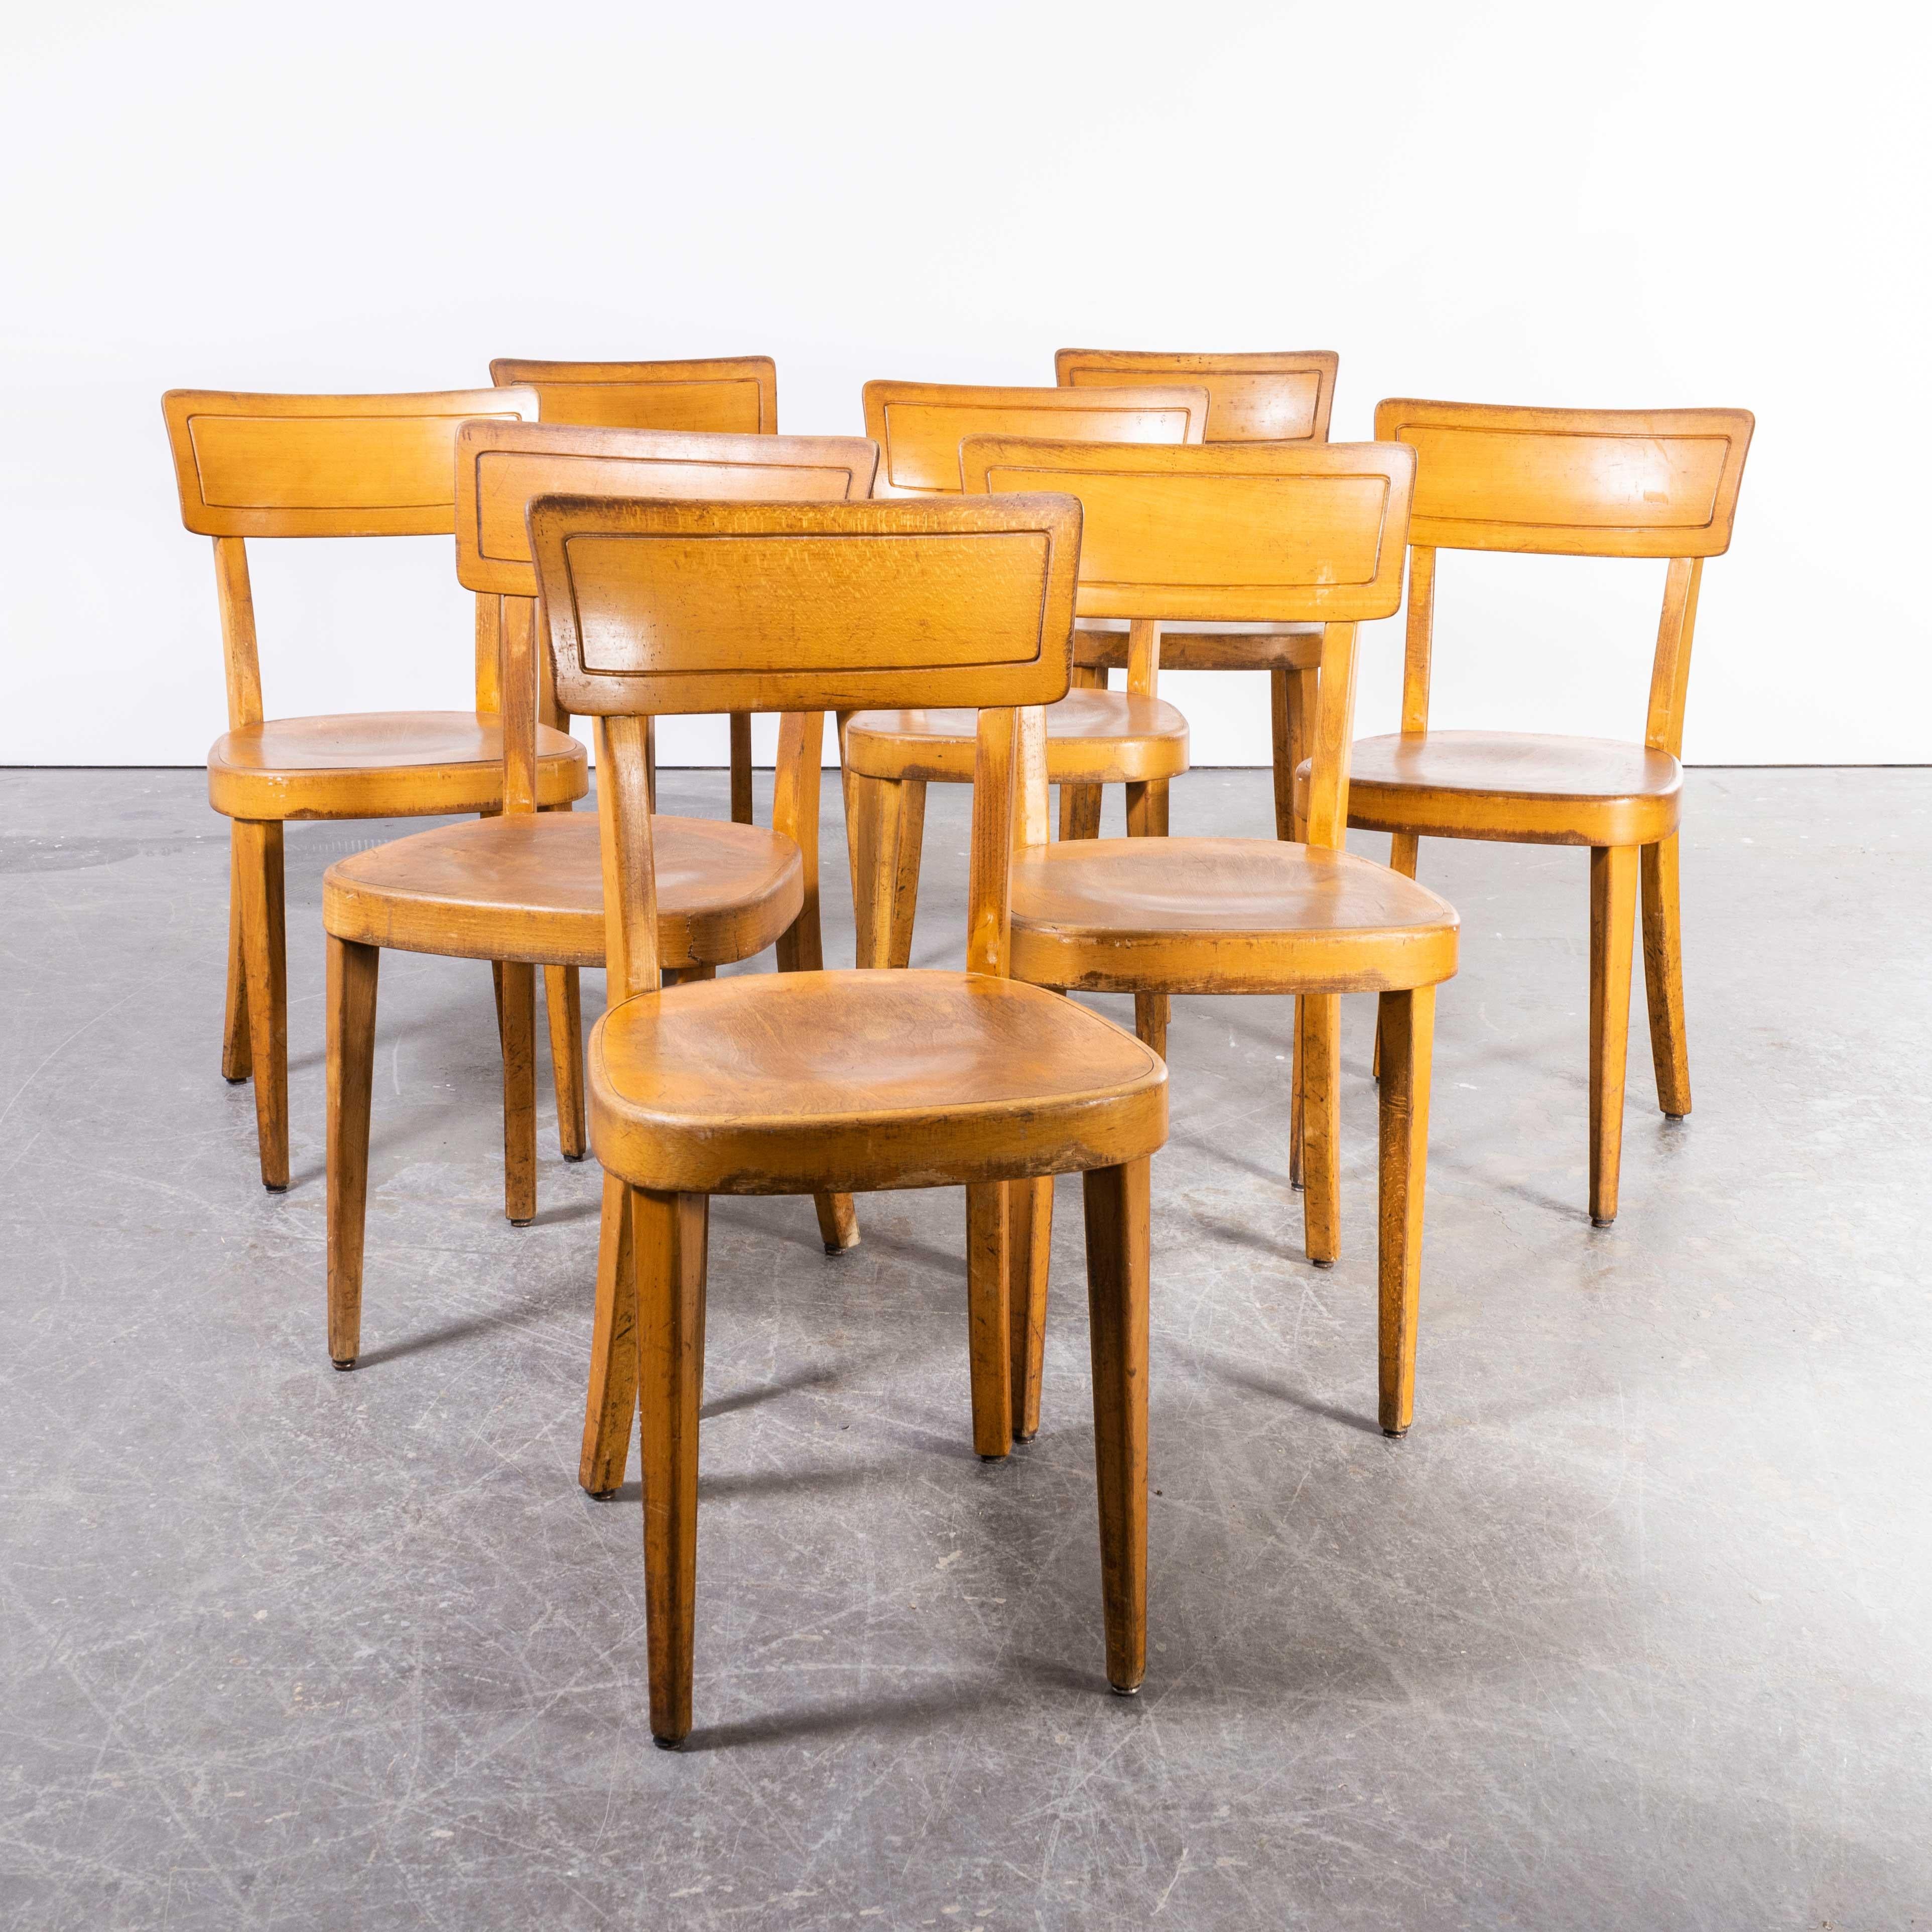 1960’s Horgen Glarus Beech Saddle Back Dining Chairs – Set Of Eight
1960’s Horgen Glarus Beech Saddle Back Dining Chairs – Set Of Eight. One of the best sets of chairs we have sourced and our first from Horgen Glarus the oldest surviving furniture